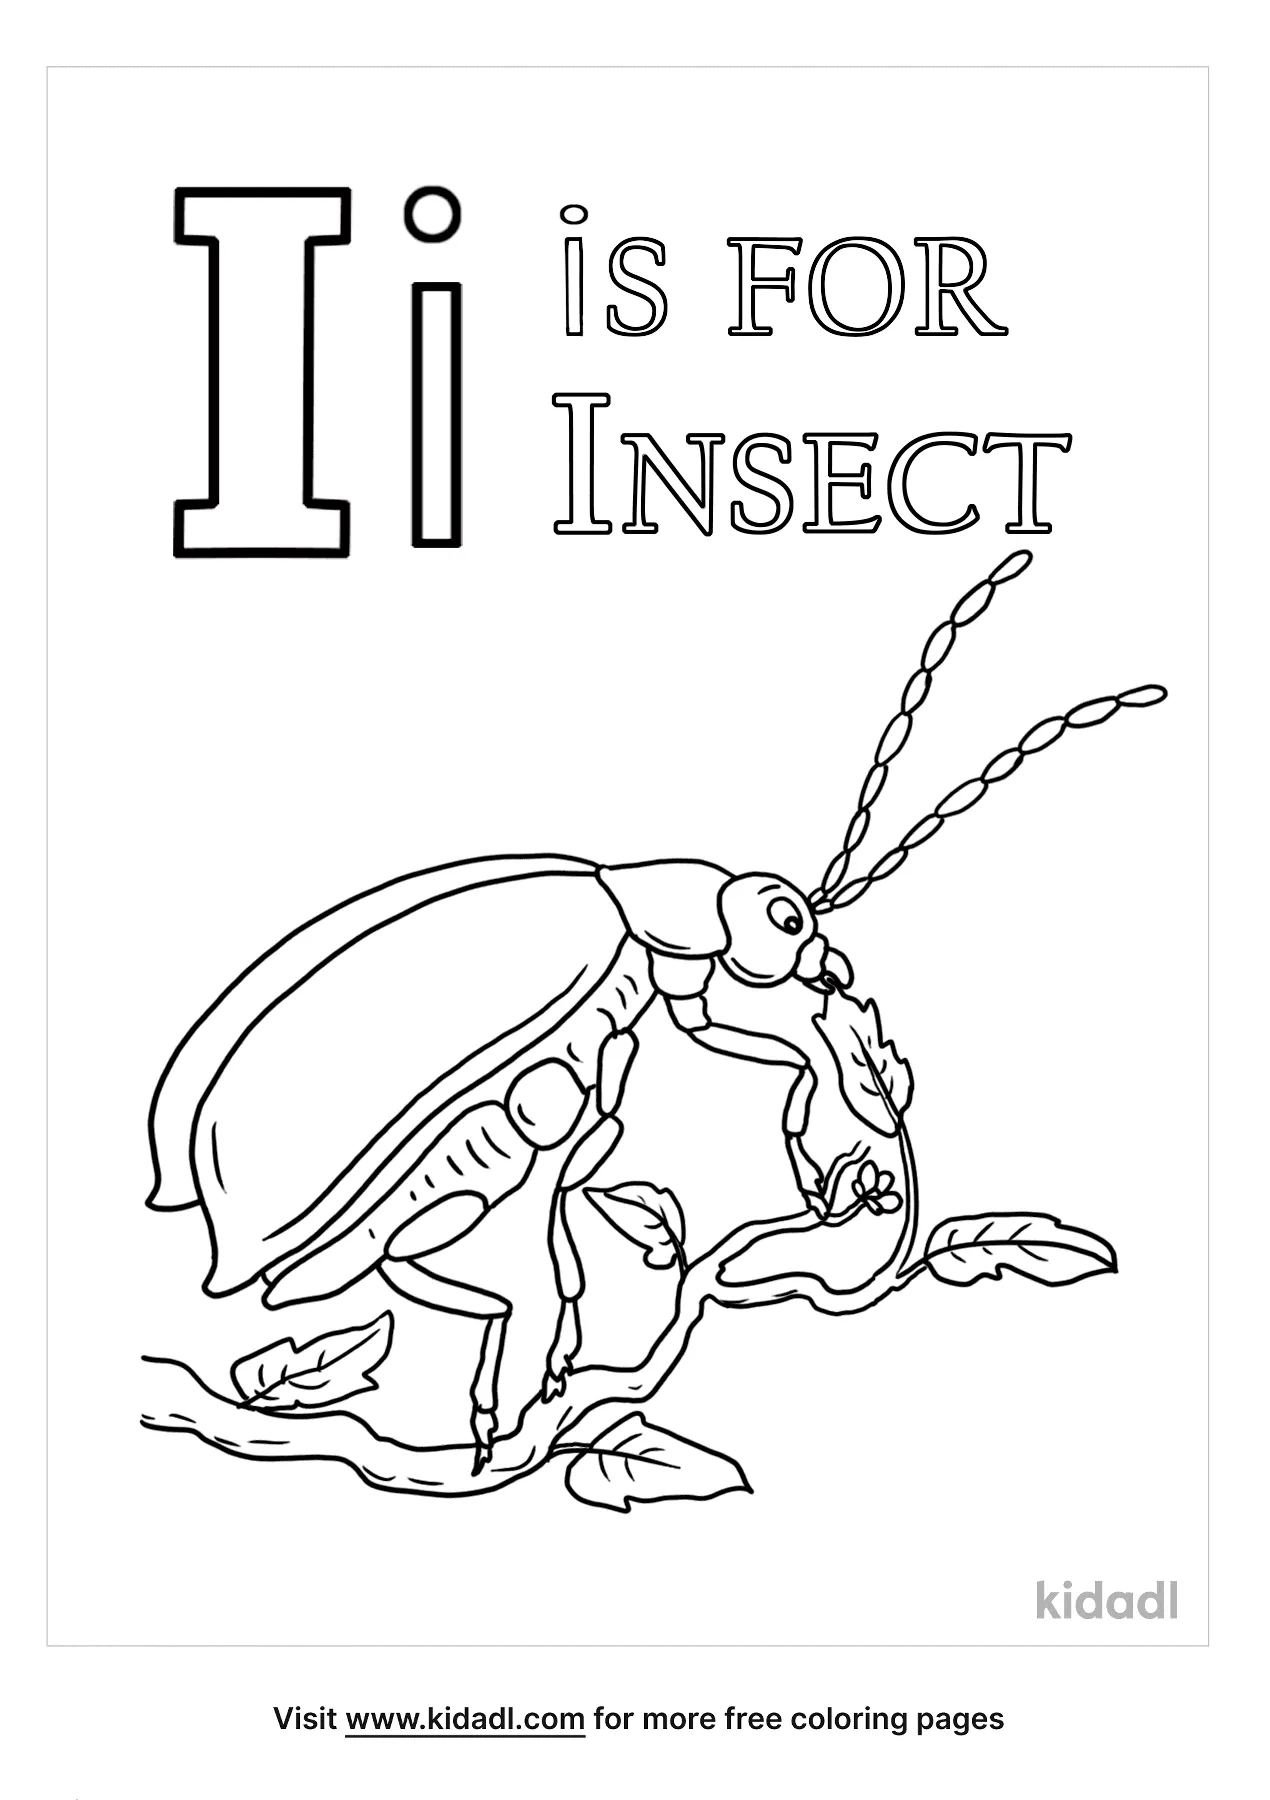 Free I Is For Insect Coloring Page | Coloring Page Printables | Kidadl